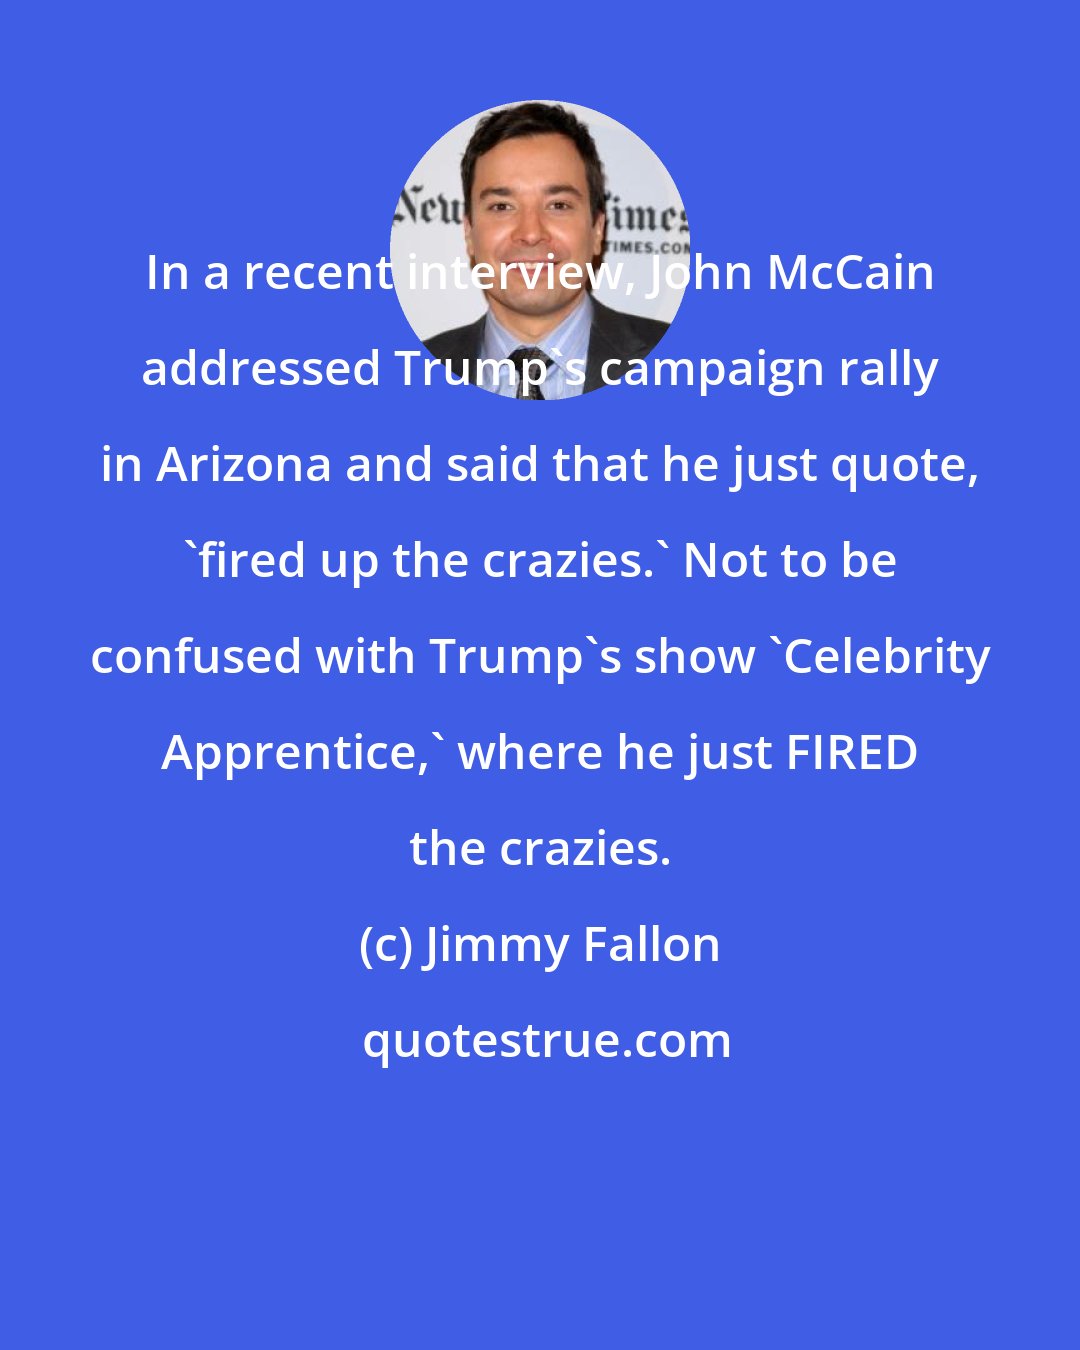 Jimmy Fallon: In a recent interview, John McCain addressed Trump's campaign rally in Arizona and said that he just quote, 'fired up the crazies.' Not to be confused with Trump's show 'Celebrity Apprentice,' where he just FIRED the crazies.